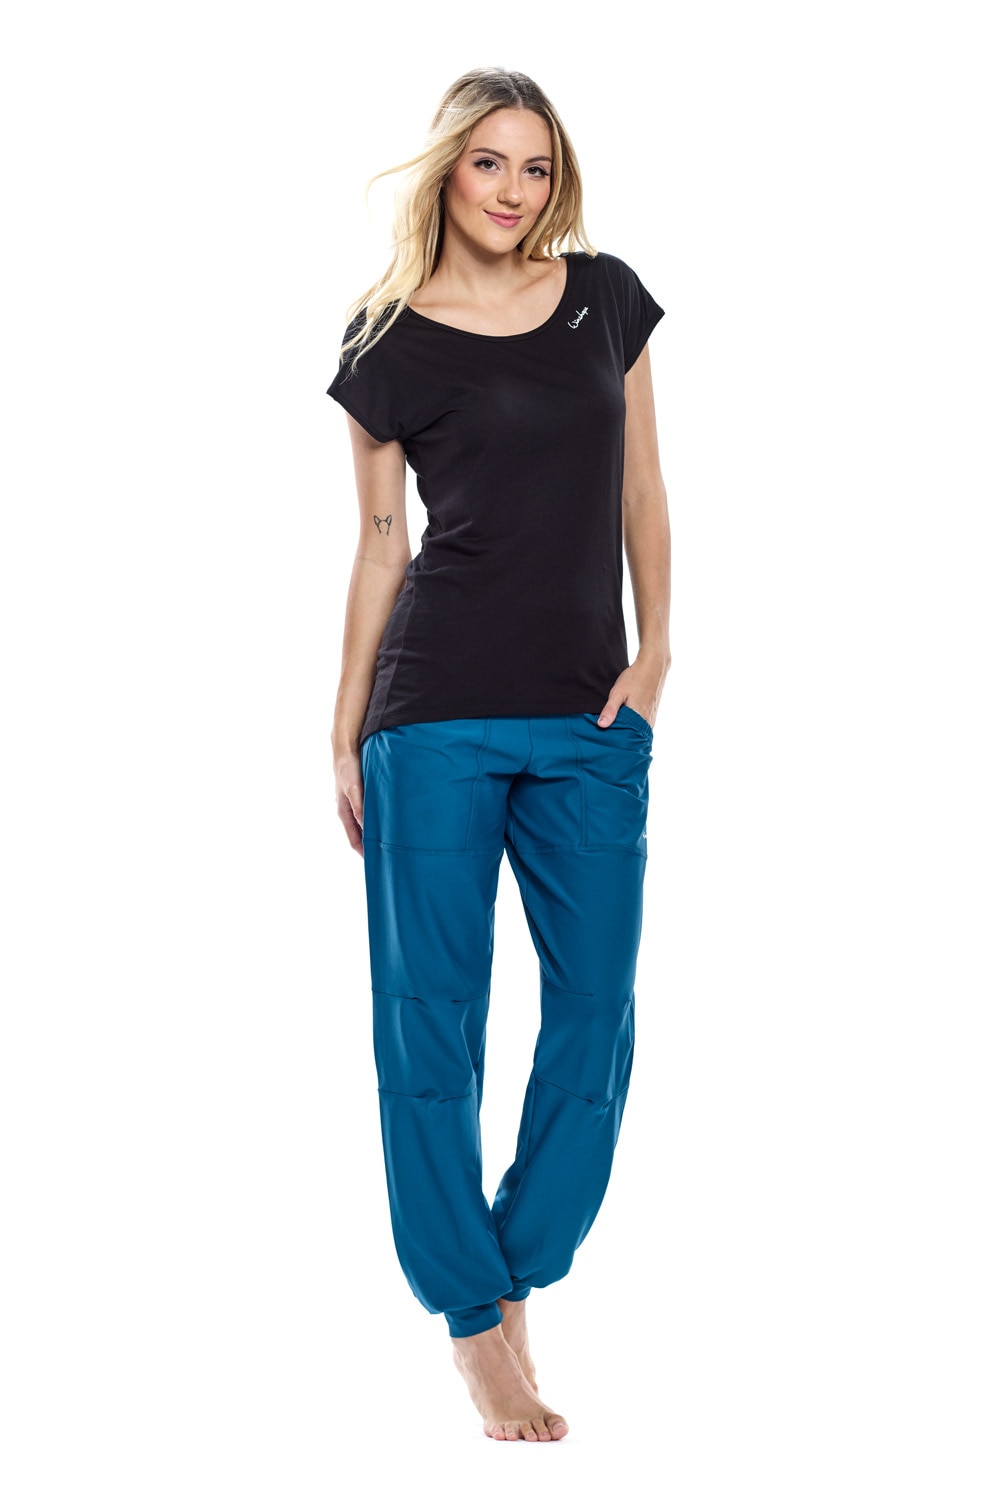 Time OTTO LEI101C«, Comfort Winshape High online »Functional Trousers Waist bei Leisure Sporthose